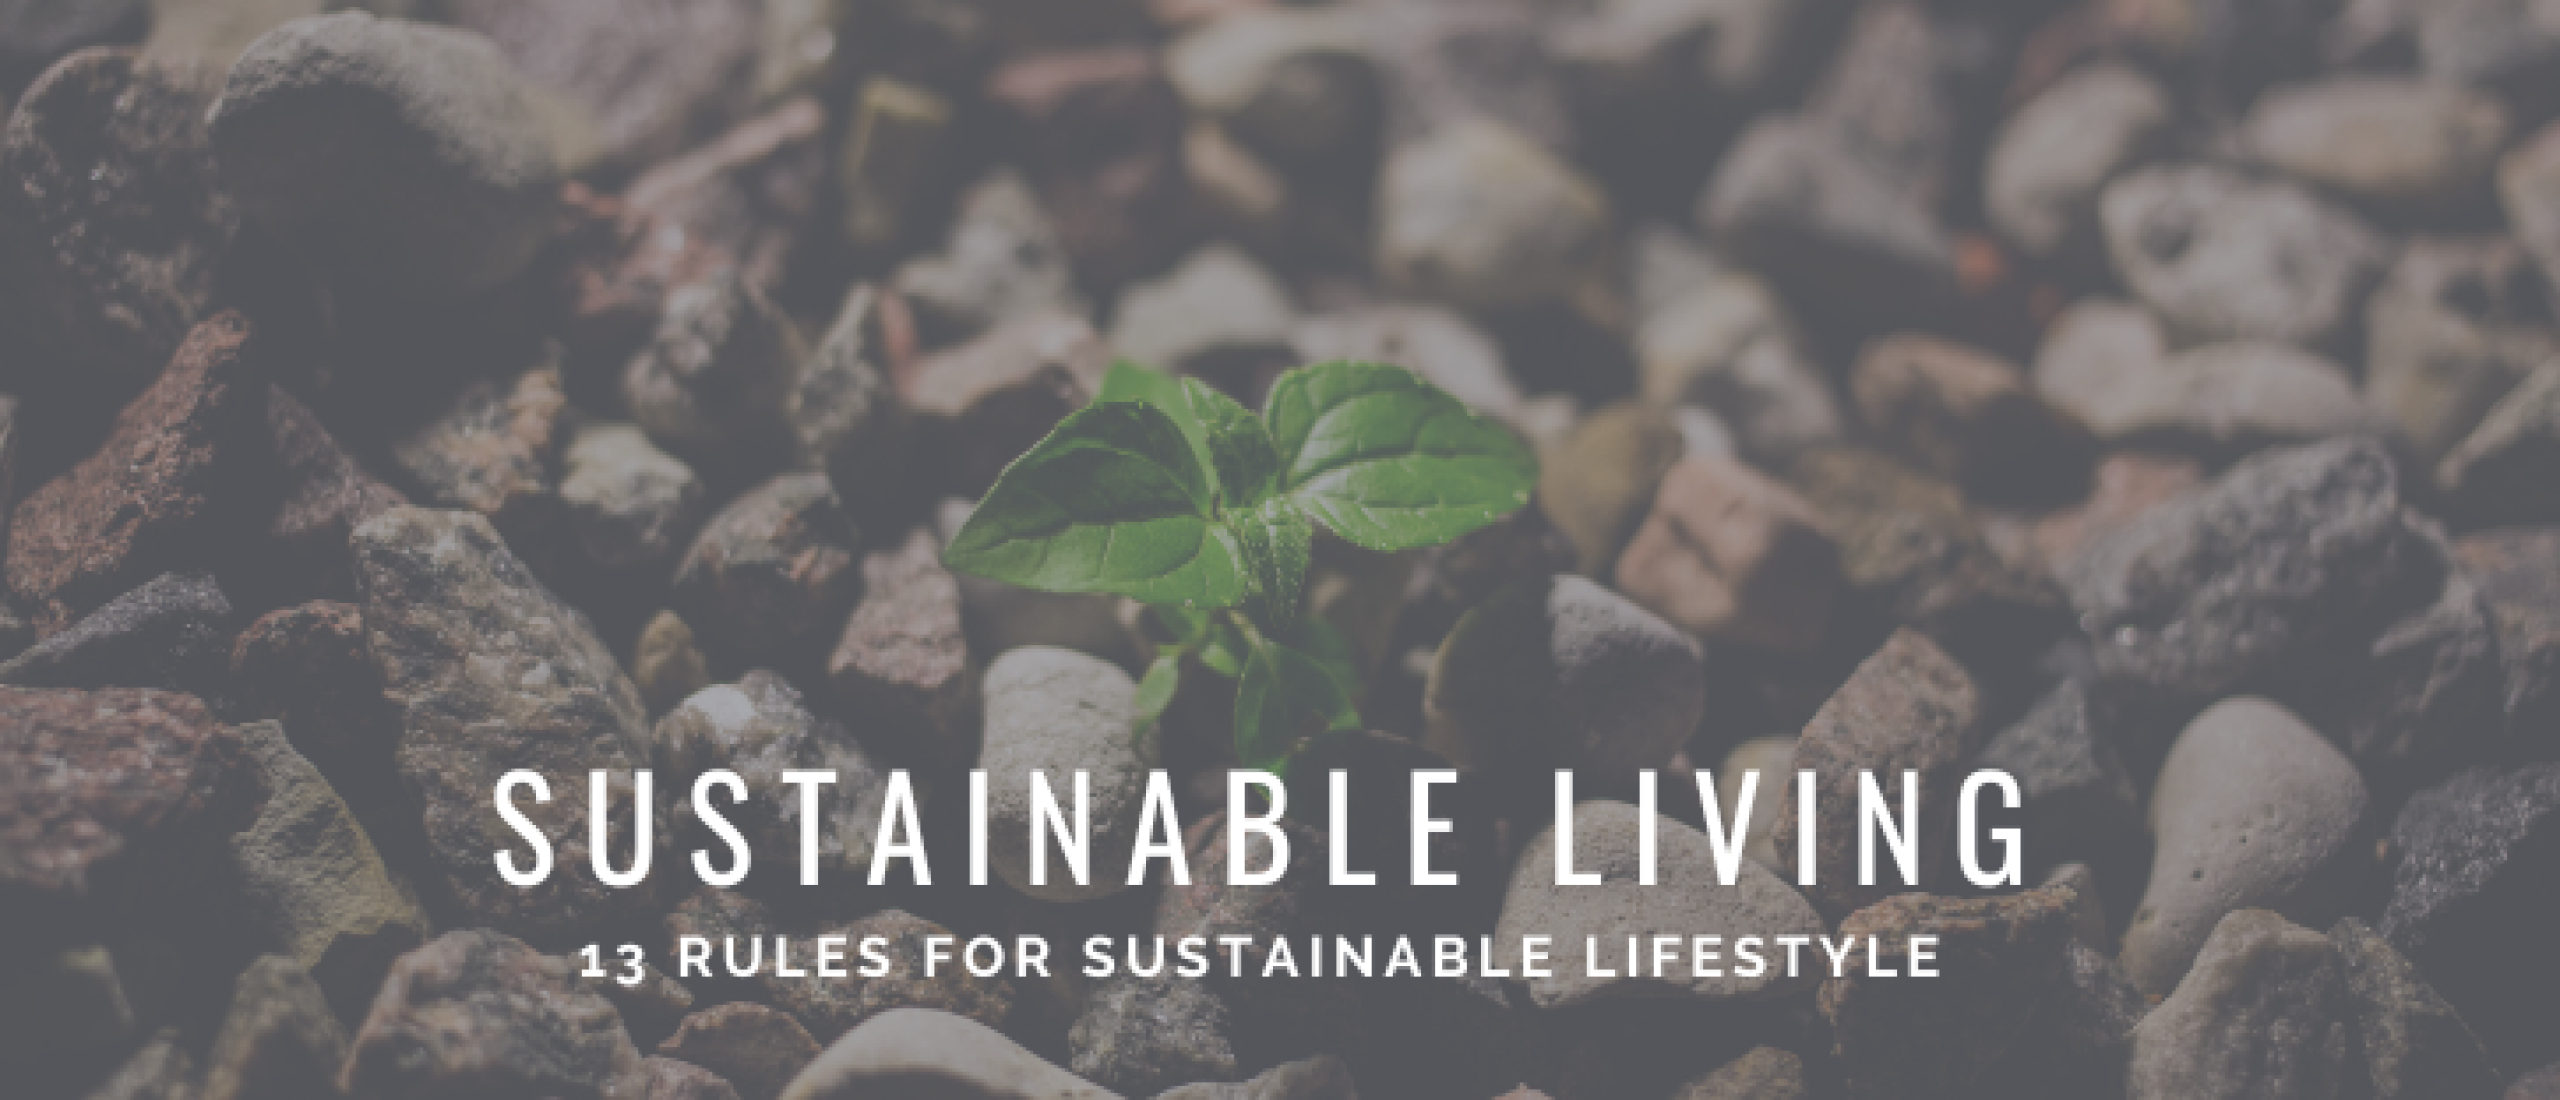 Sustainable Living: 13 Rules for Sustainable Lifestyle | Happy Investors